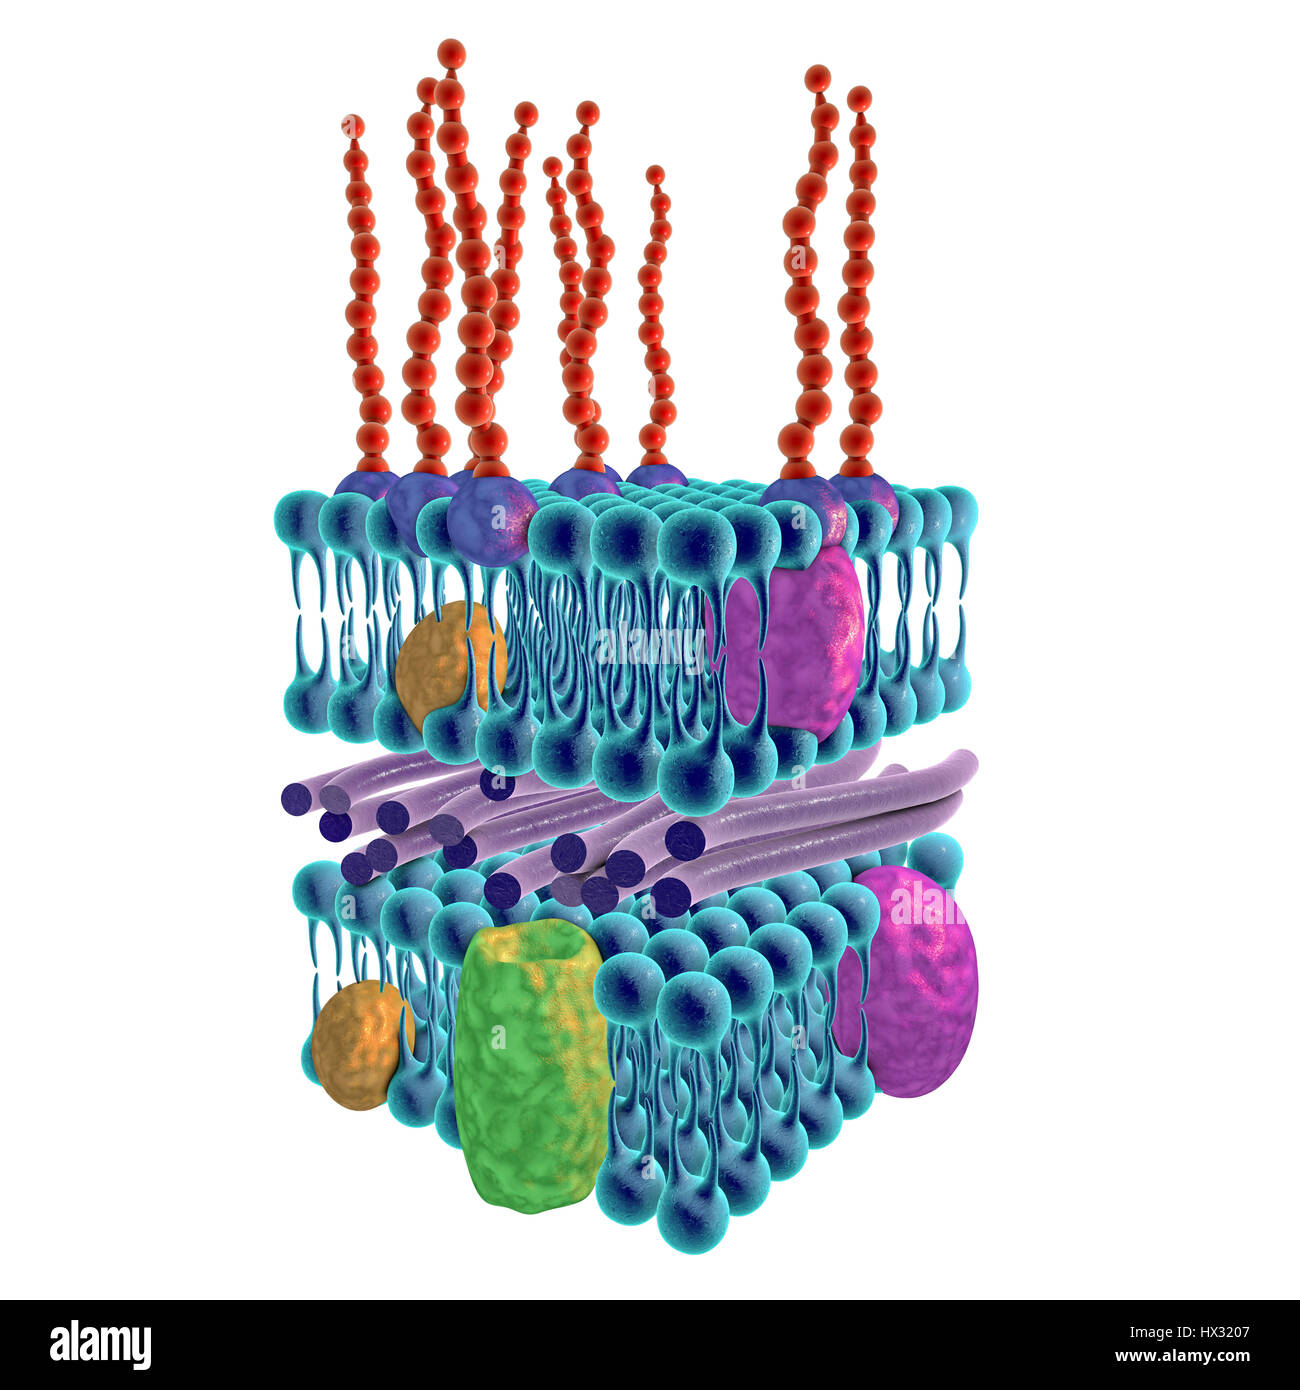 Gram-negative bacterial cell wall, illustration. The horizontal layers include both an external and an internal membrane (blue), both containing transmembrane proteins (green, yellow and purple). The membranes are separated by a thin peptidoglycan layer (purple rods). The outer surface of the external membrane is often a lipopolysaccharide layer with lipids (purple) in the membrane, and long saccharide side chains (red) extending out. This is termed a Gram-negative cell wall because it does not retain the Gram stain that helps identify microbial life. Stock Photo